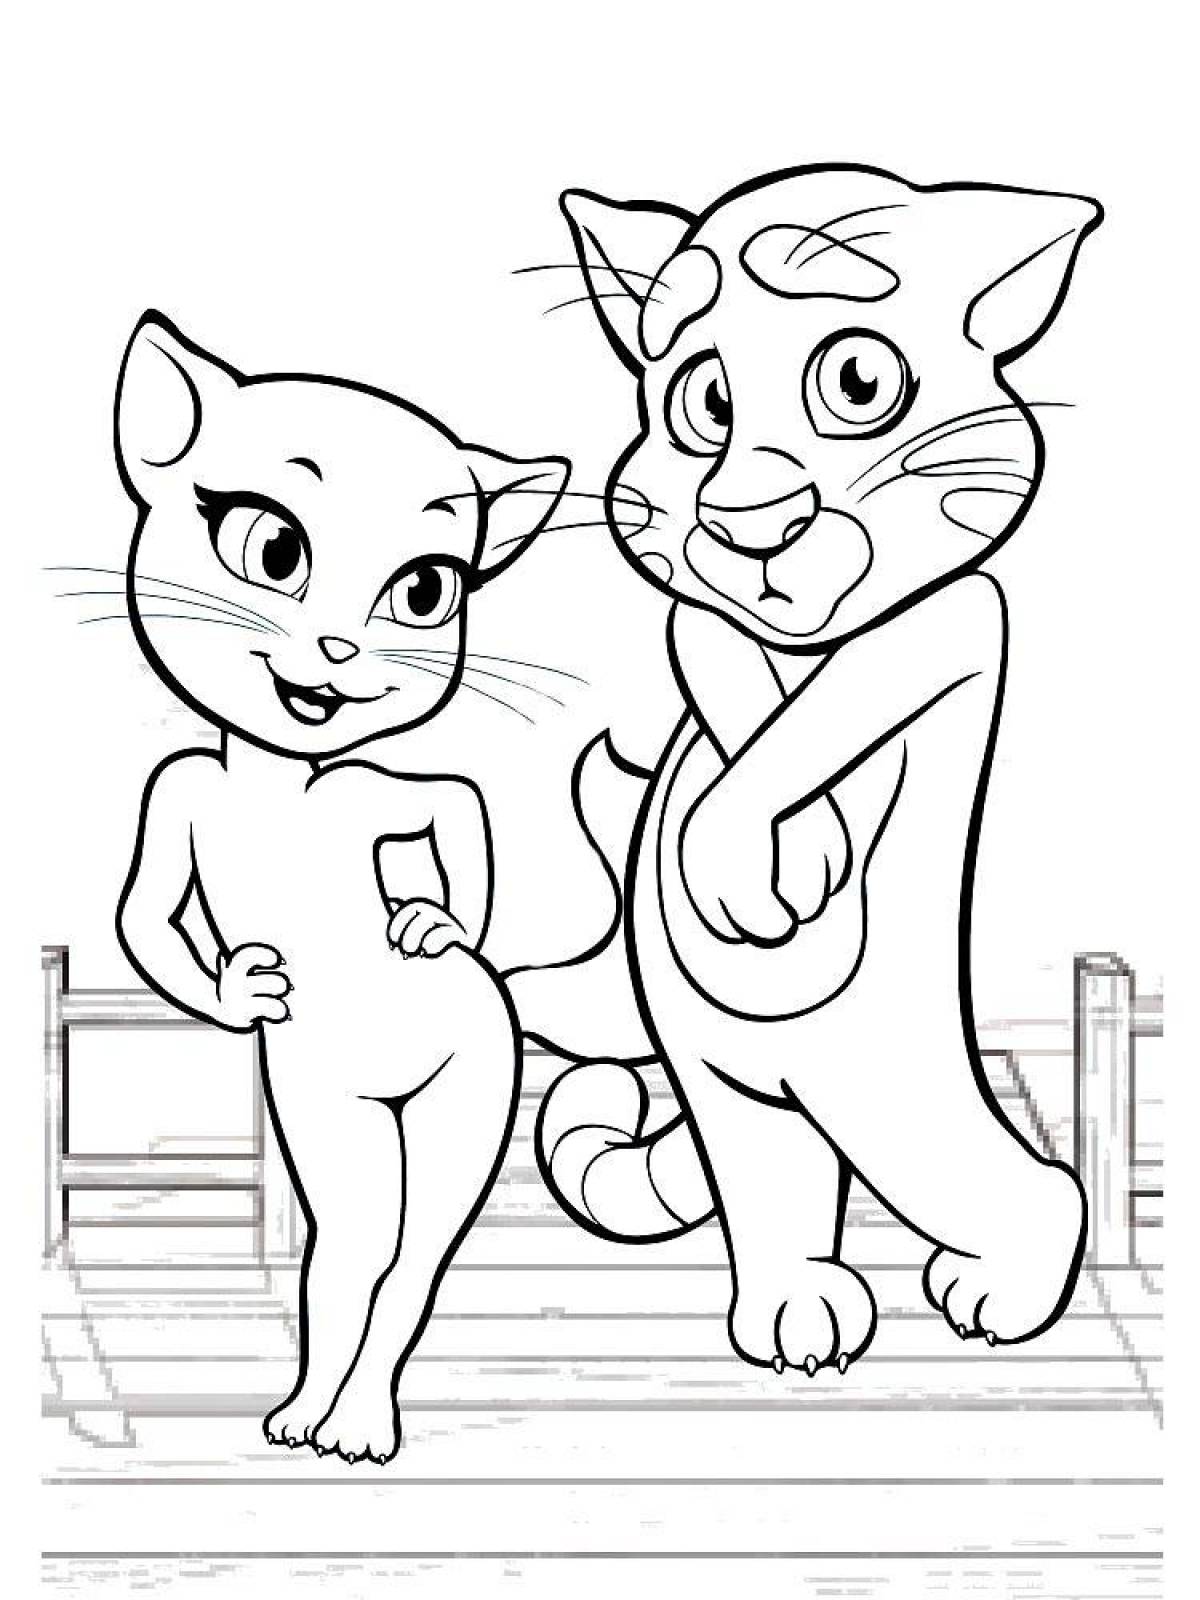 Colorful coloring page volume